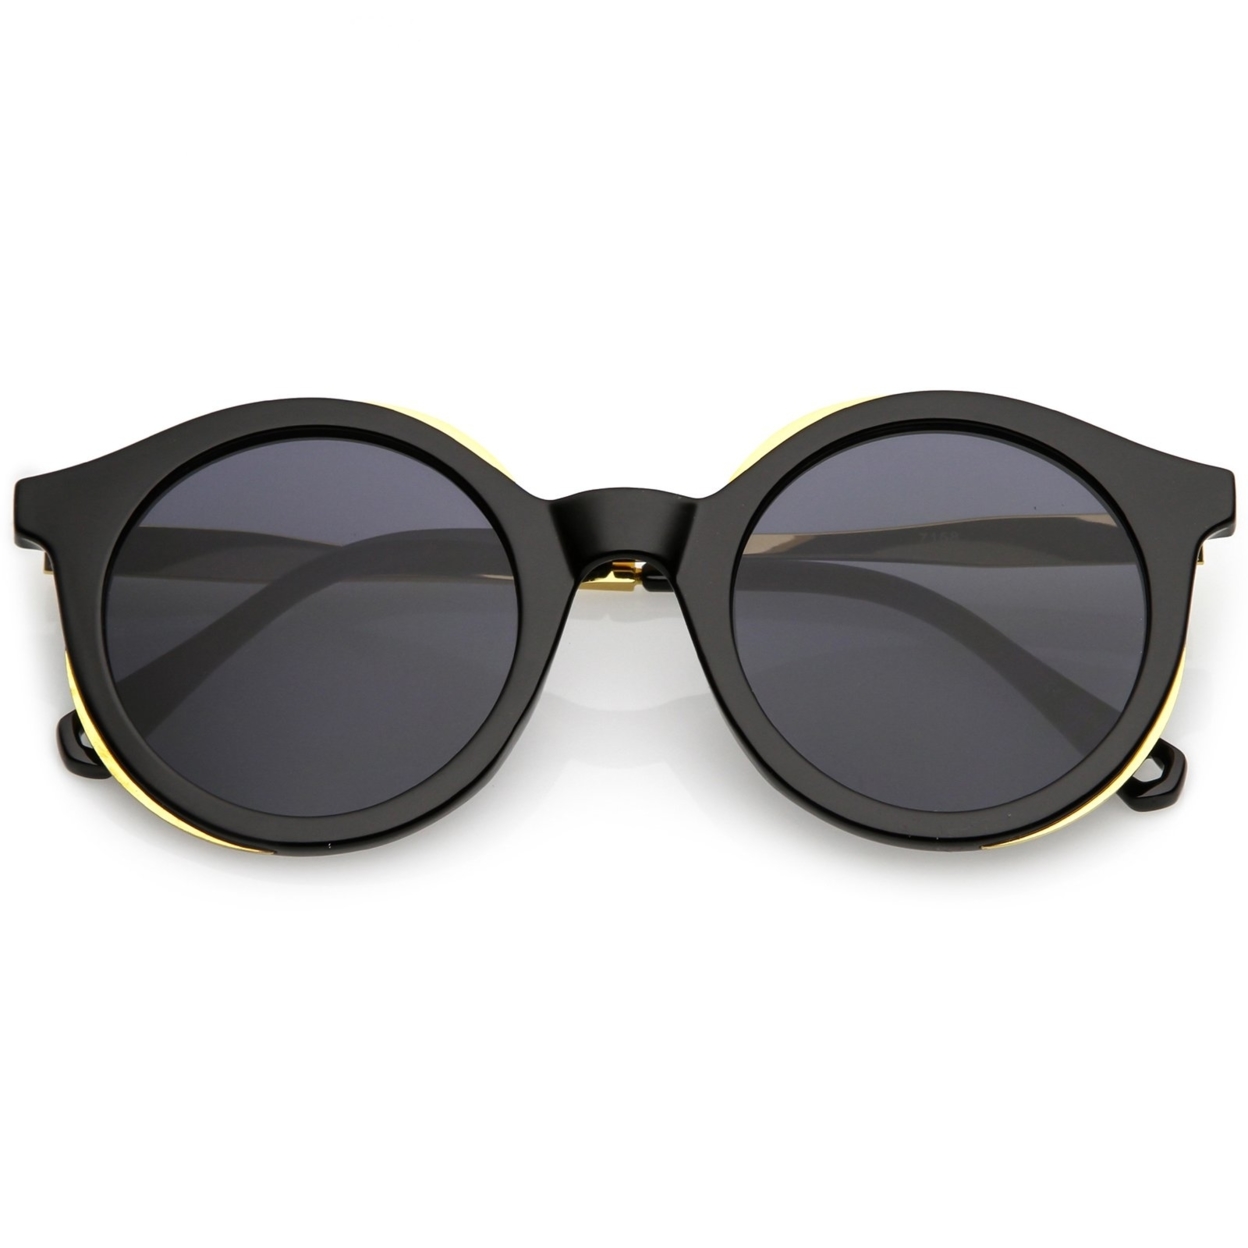 Modern Horn Rimmed Round Sunglasses With Metal Trim Round Flat Lens 51mm - Black Gold / Smoke